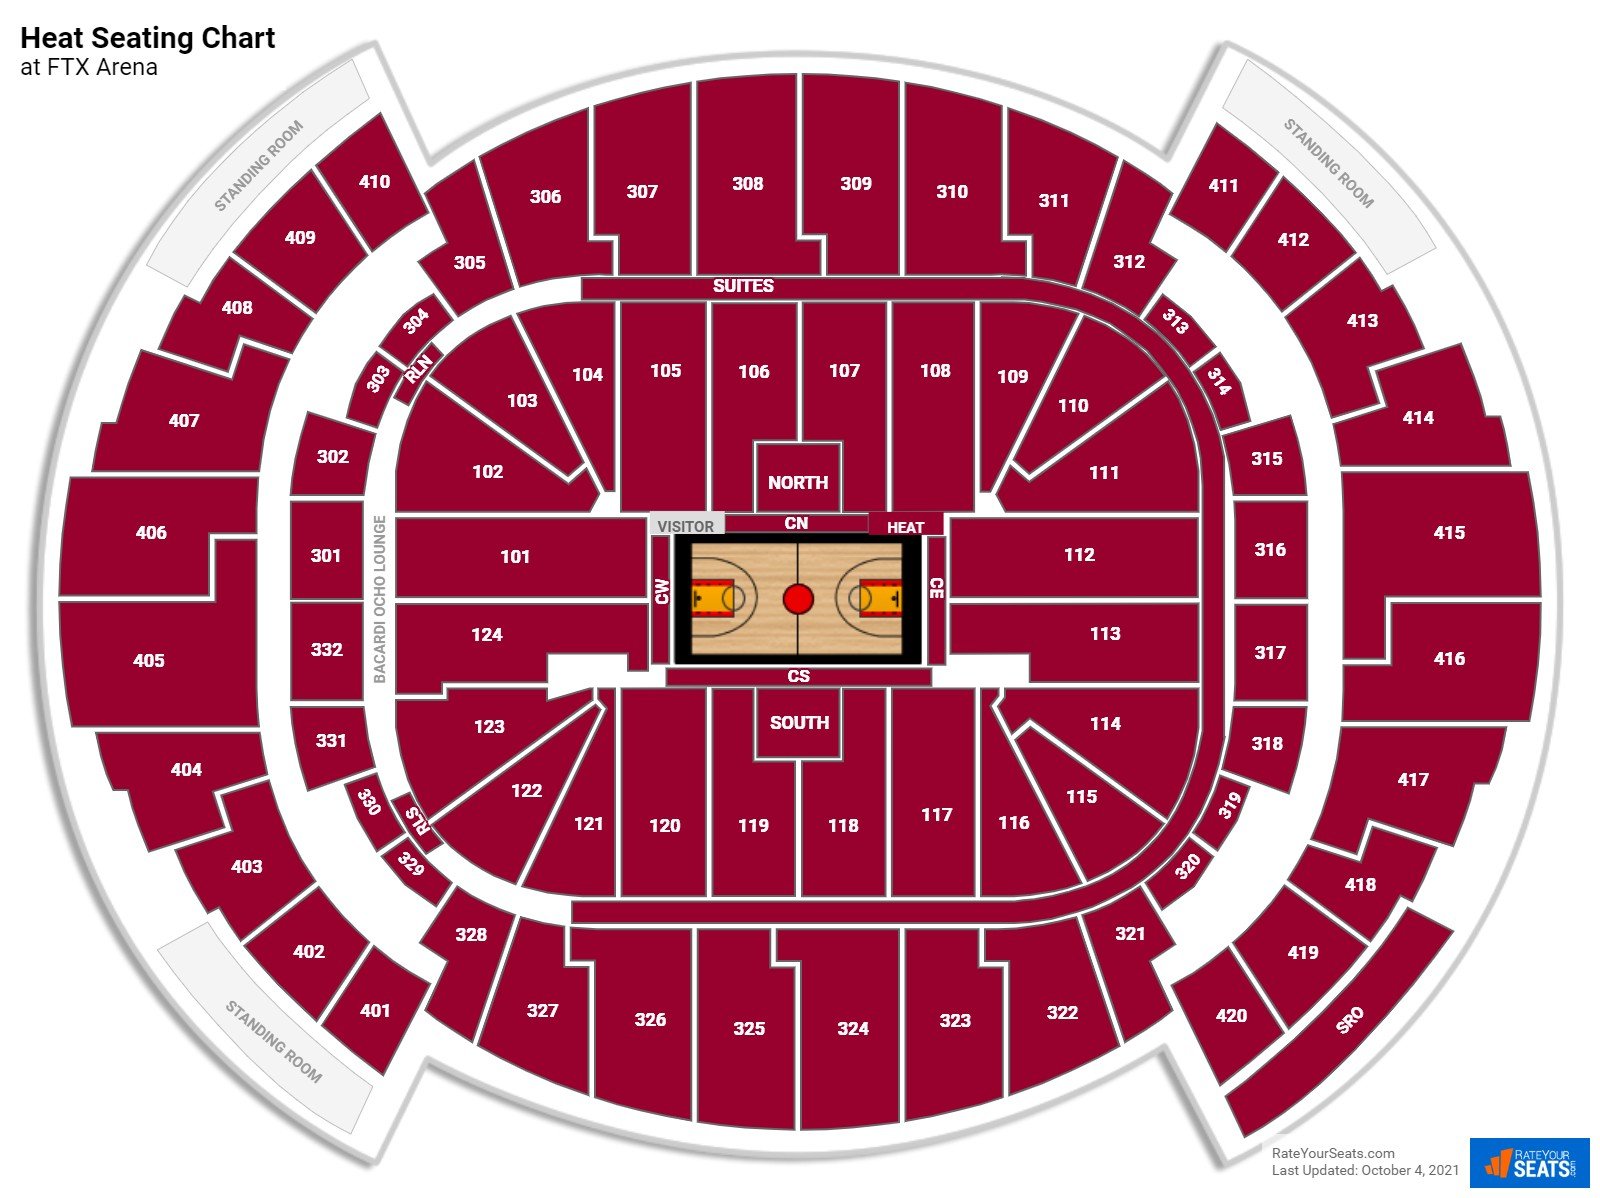 Miami Heat Seating Chart at FTX Arena